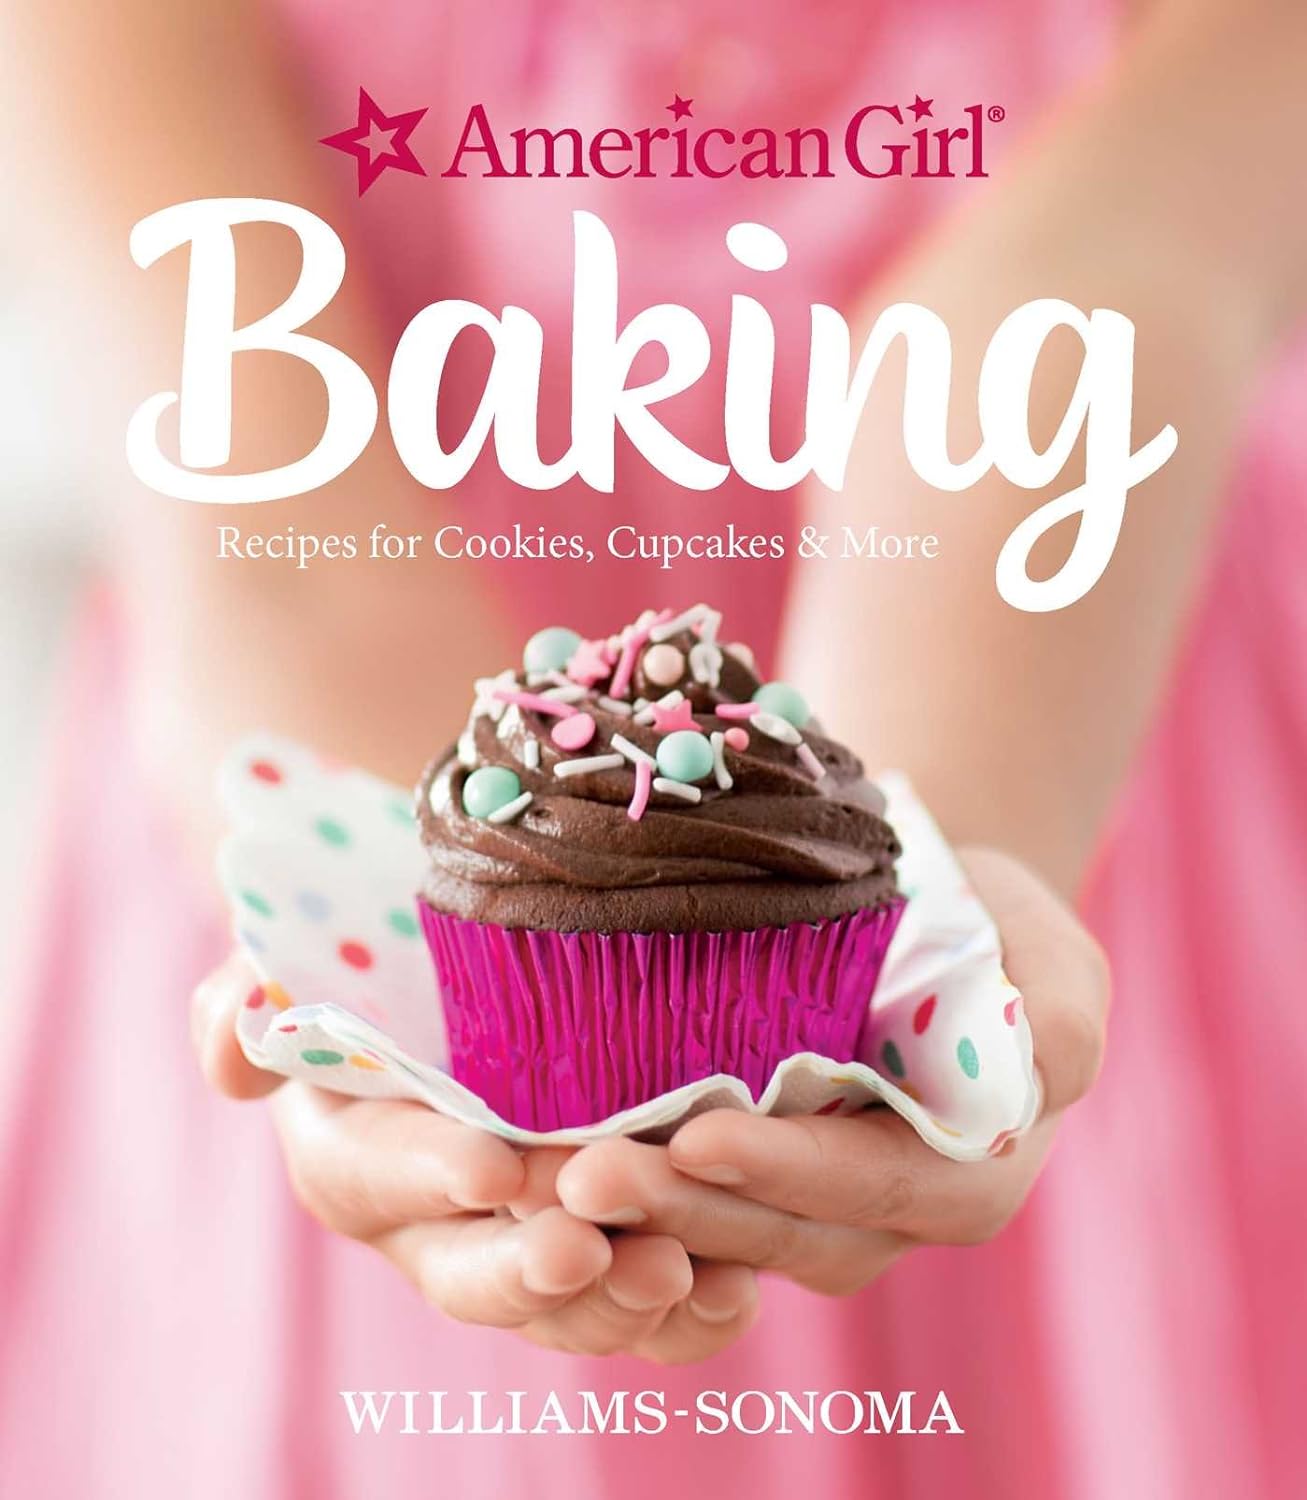 American Girl Baking Recipes for Cookies, Cupcakes & More